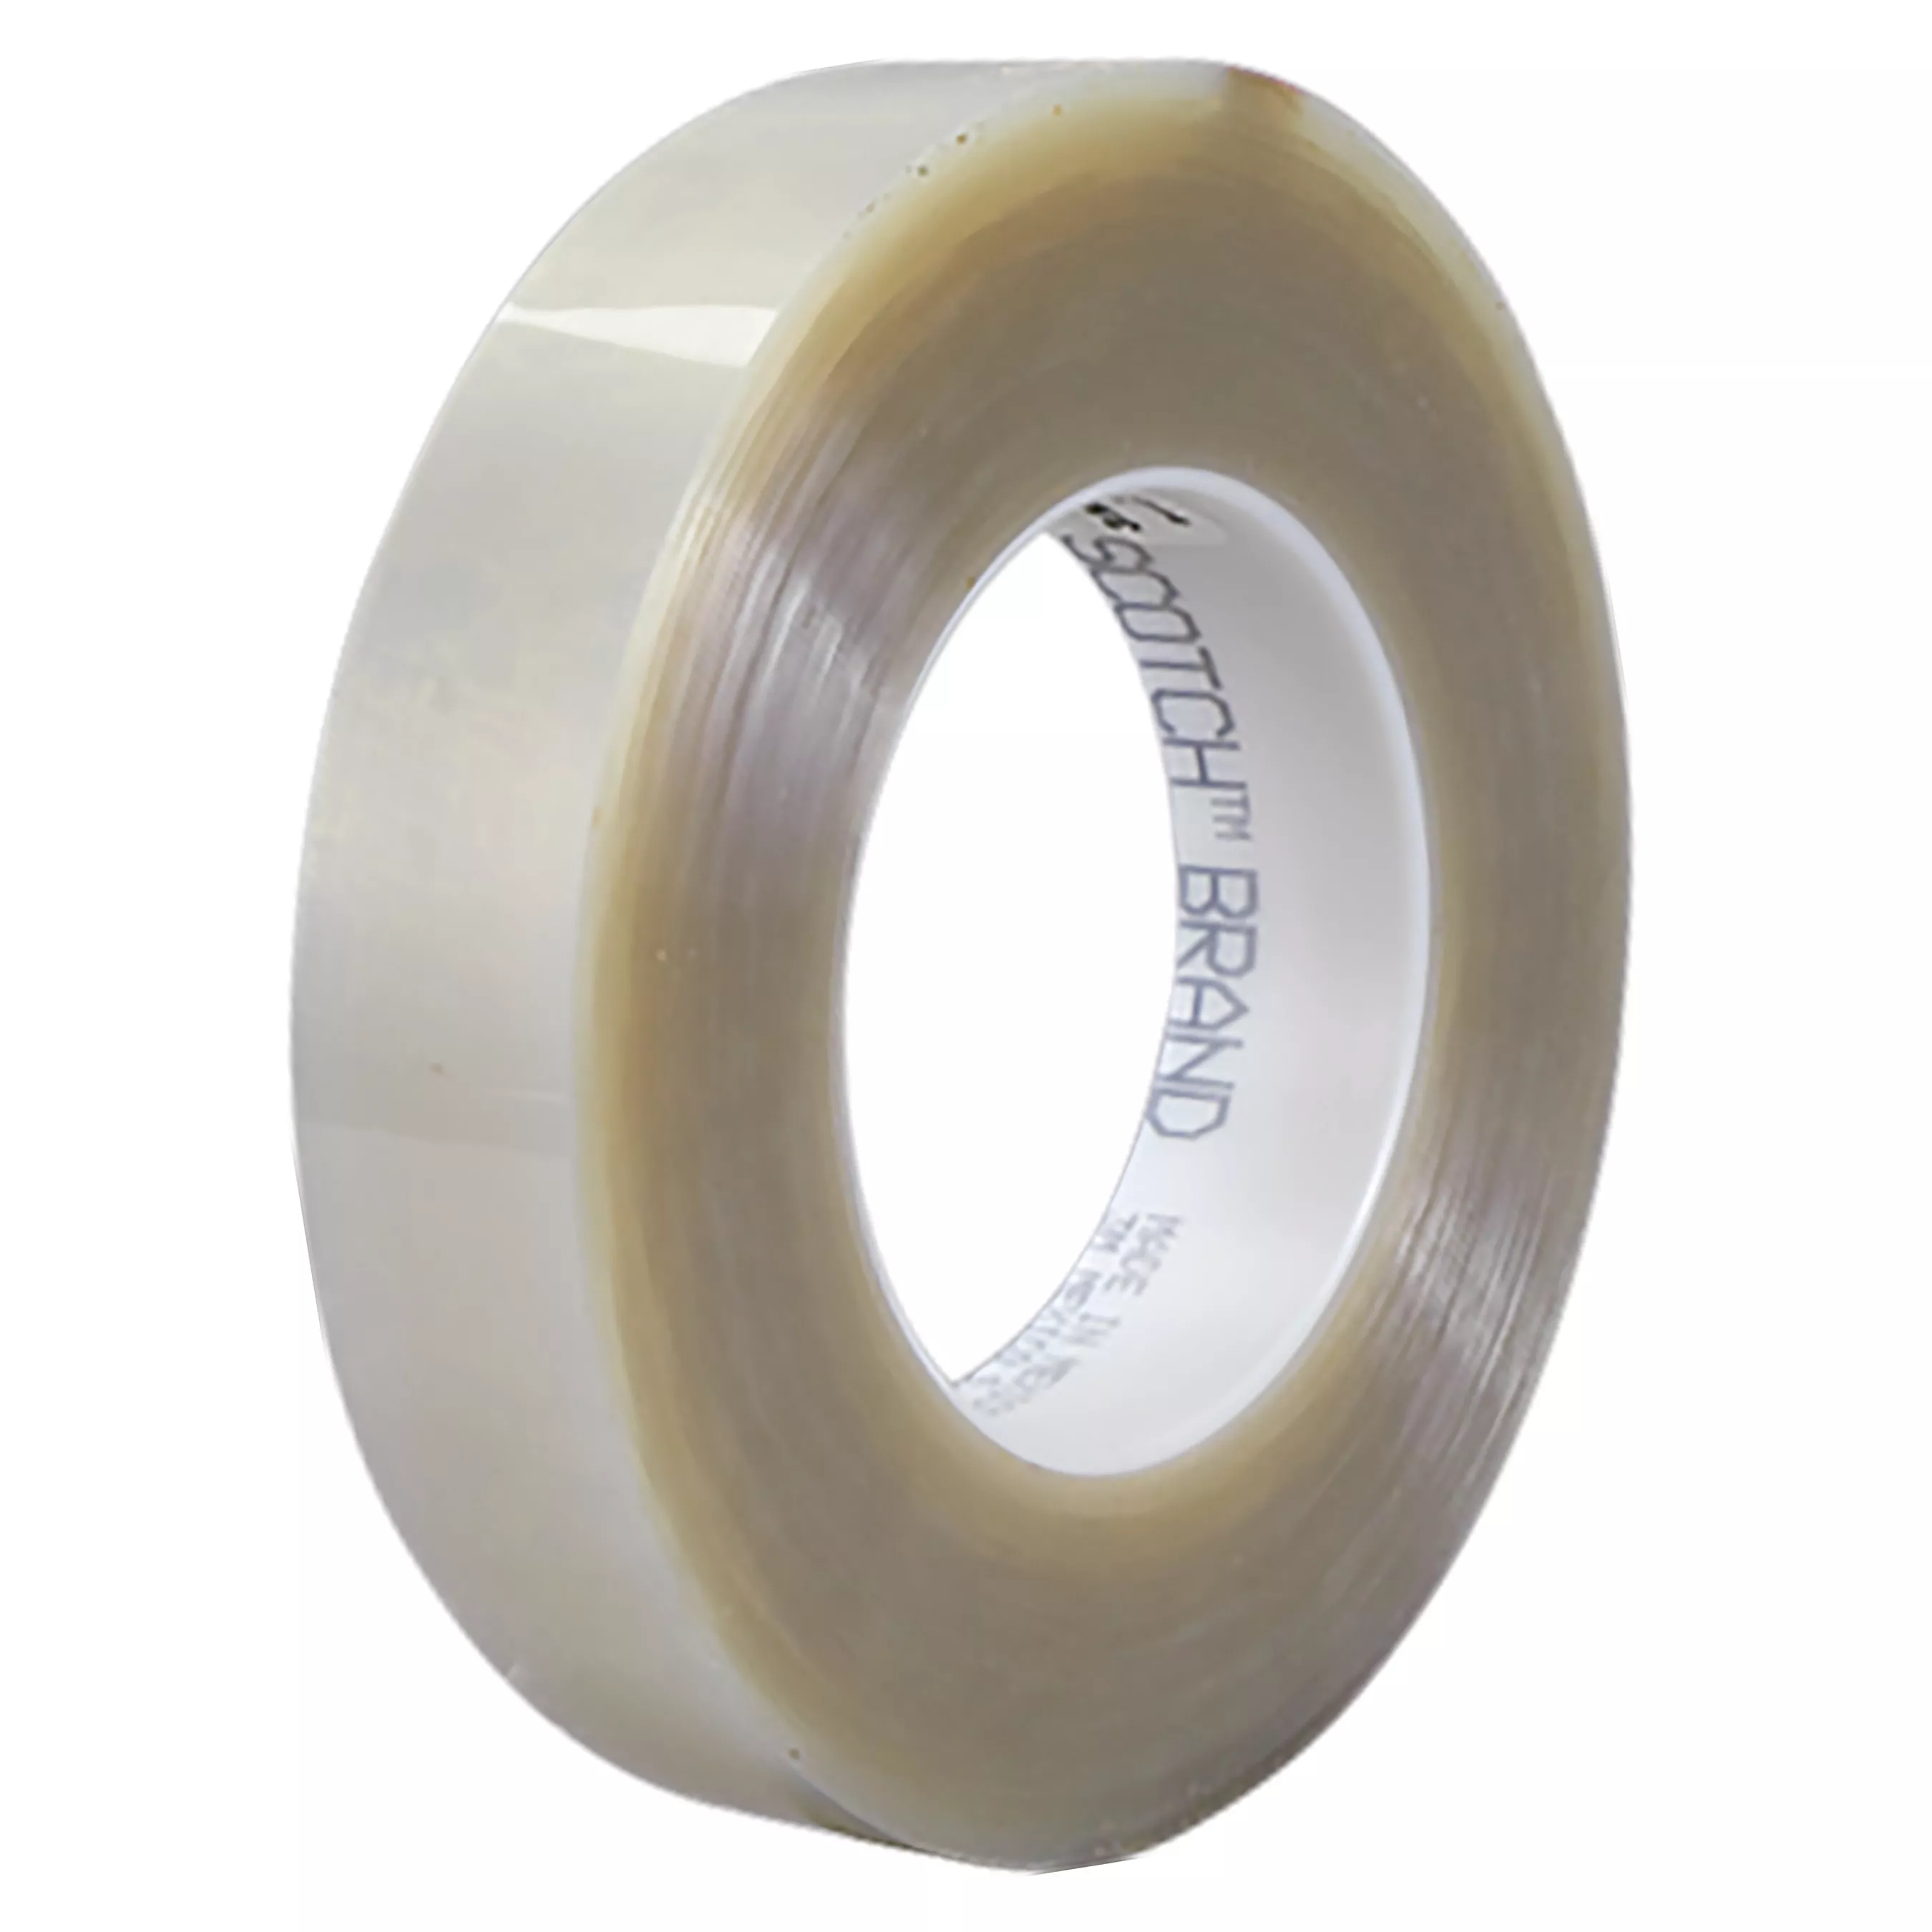 3M™ Polyester Tape 8412, Transparent, 3/4 in x 72 yd, 6.3 mil, 48
Roll/Case